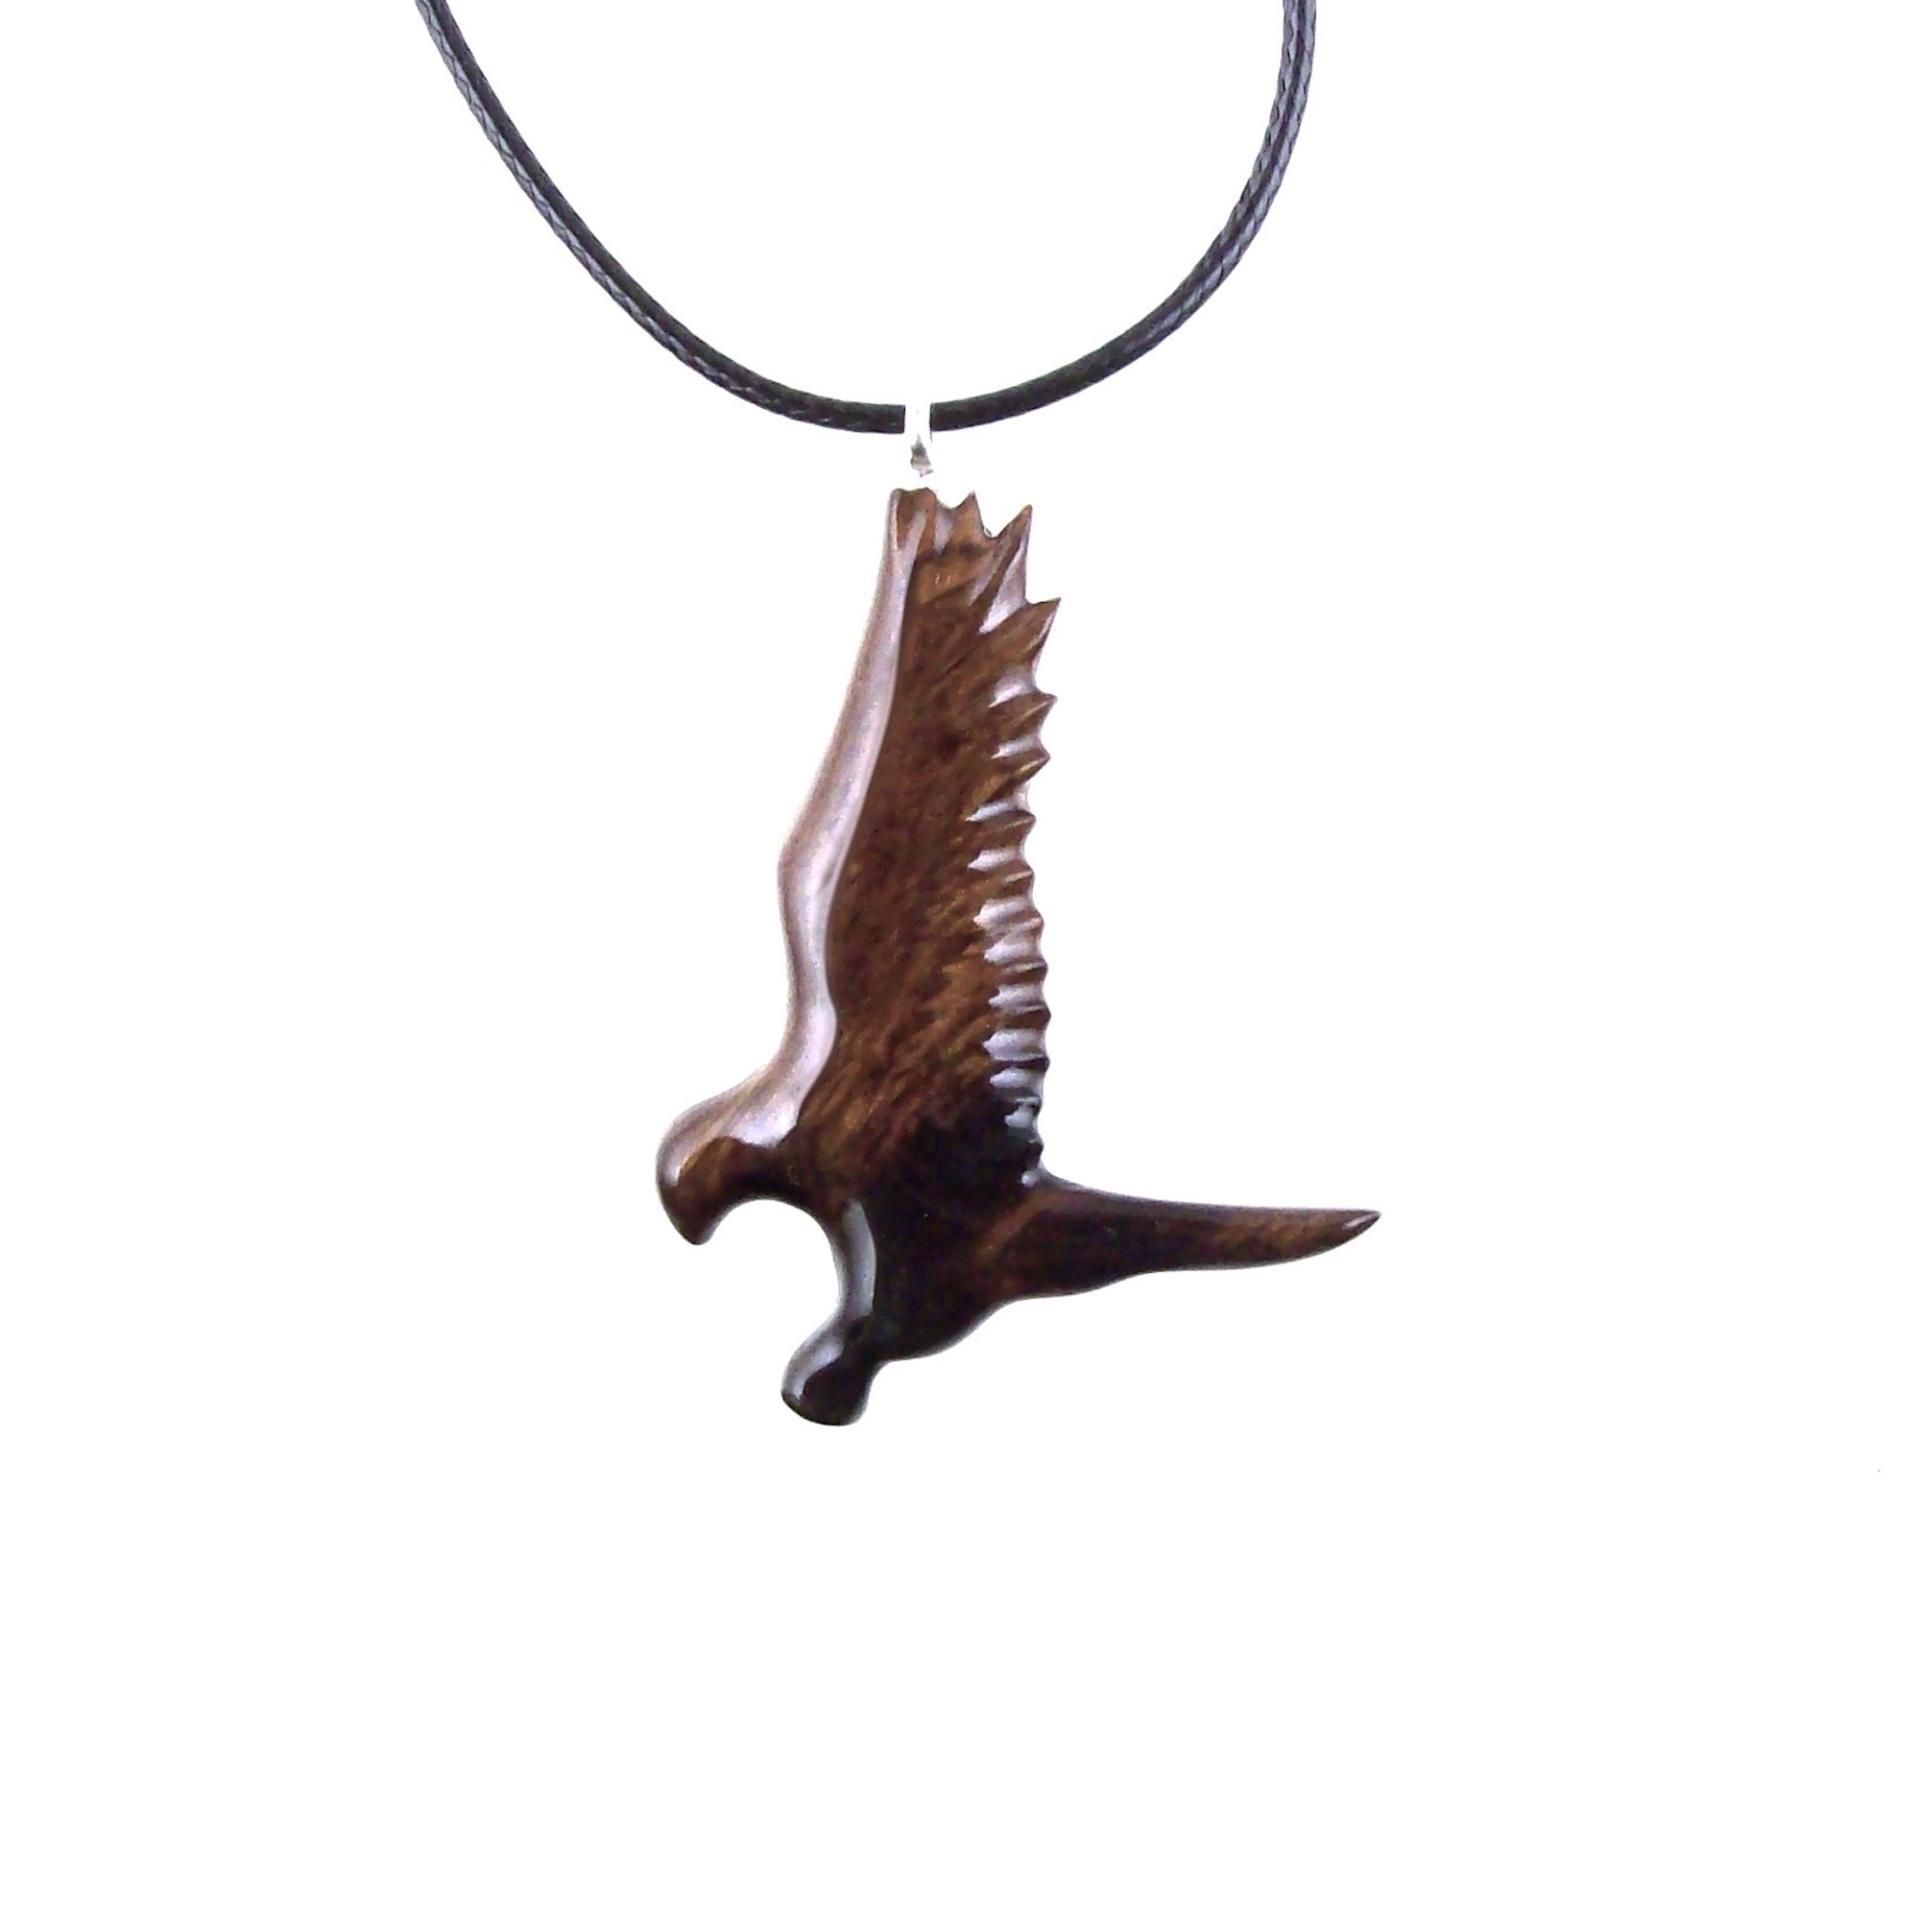 Hand Carved Hawk Pendant, Wooden Falcon Necklace, Wood Bird Necklace, Totem Jewelry for Men or Women, One of a Kind Gift for Him Her